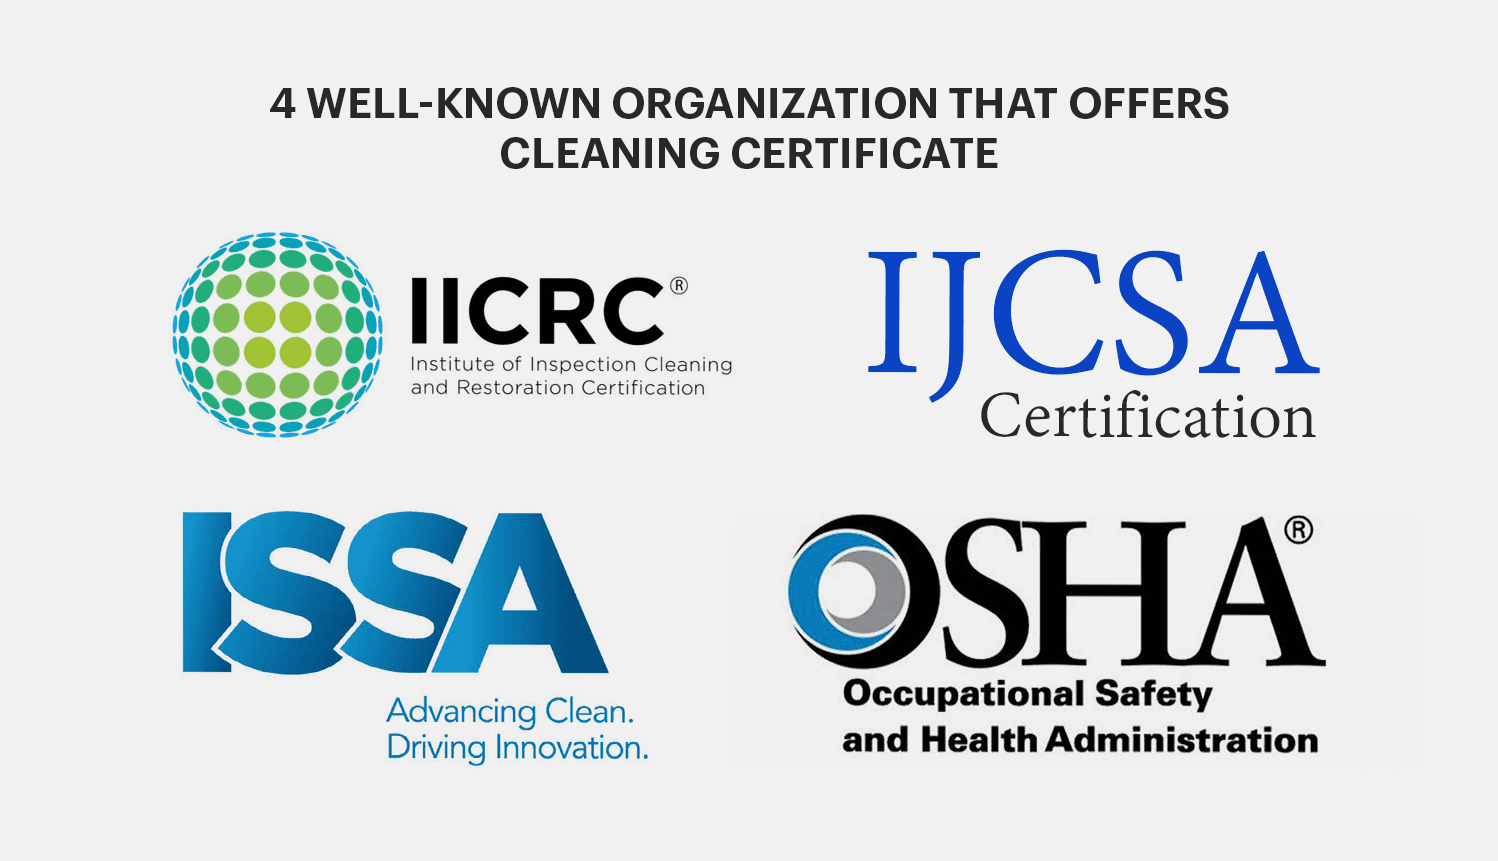 Organization offer certification for cleaning business